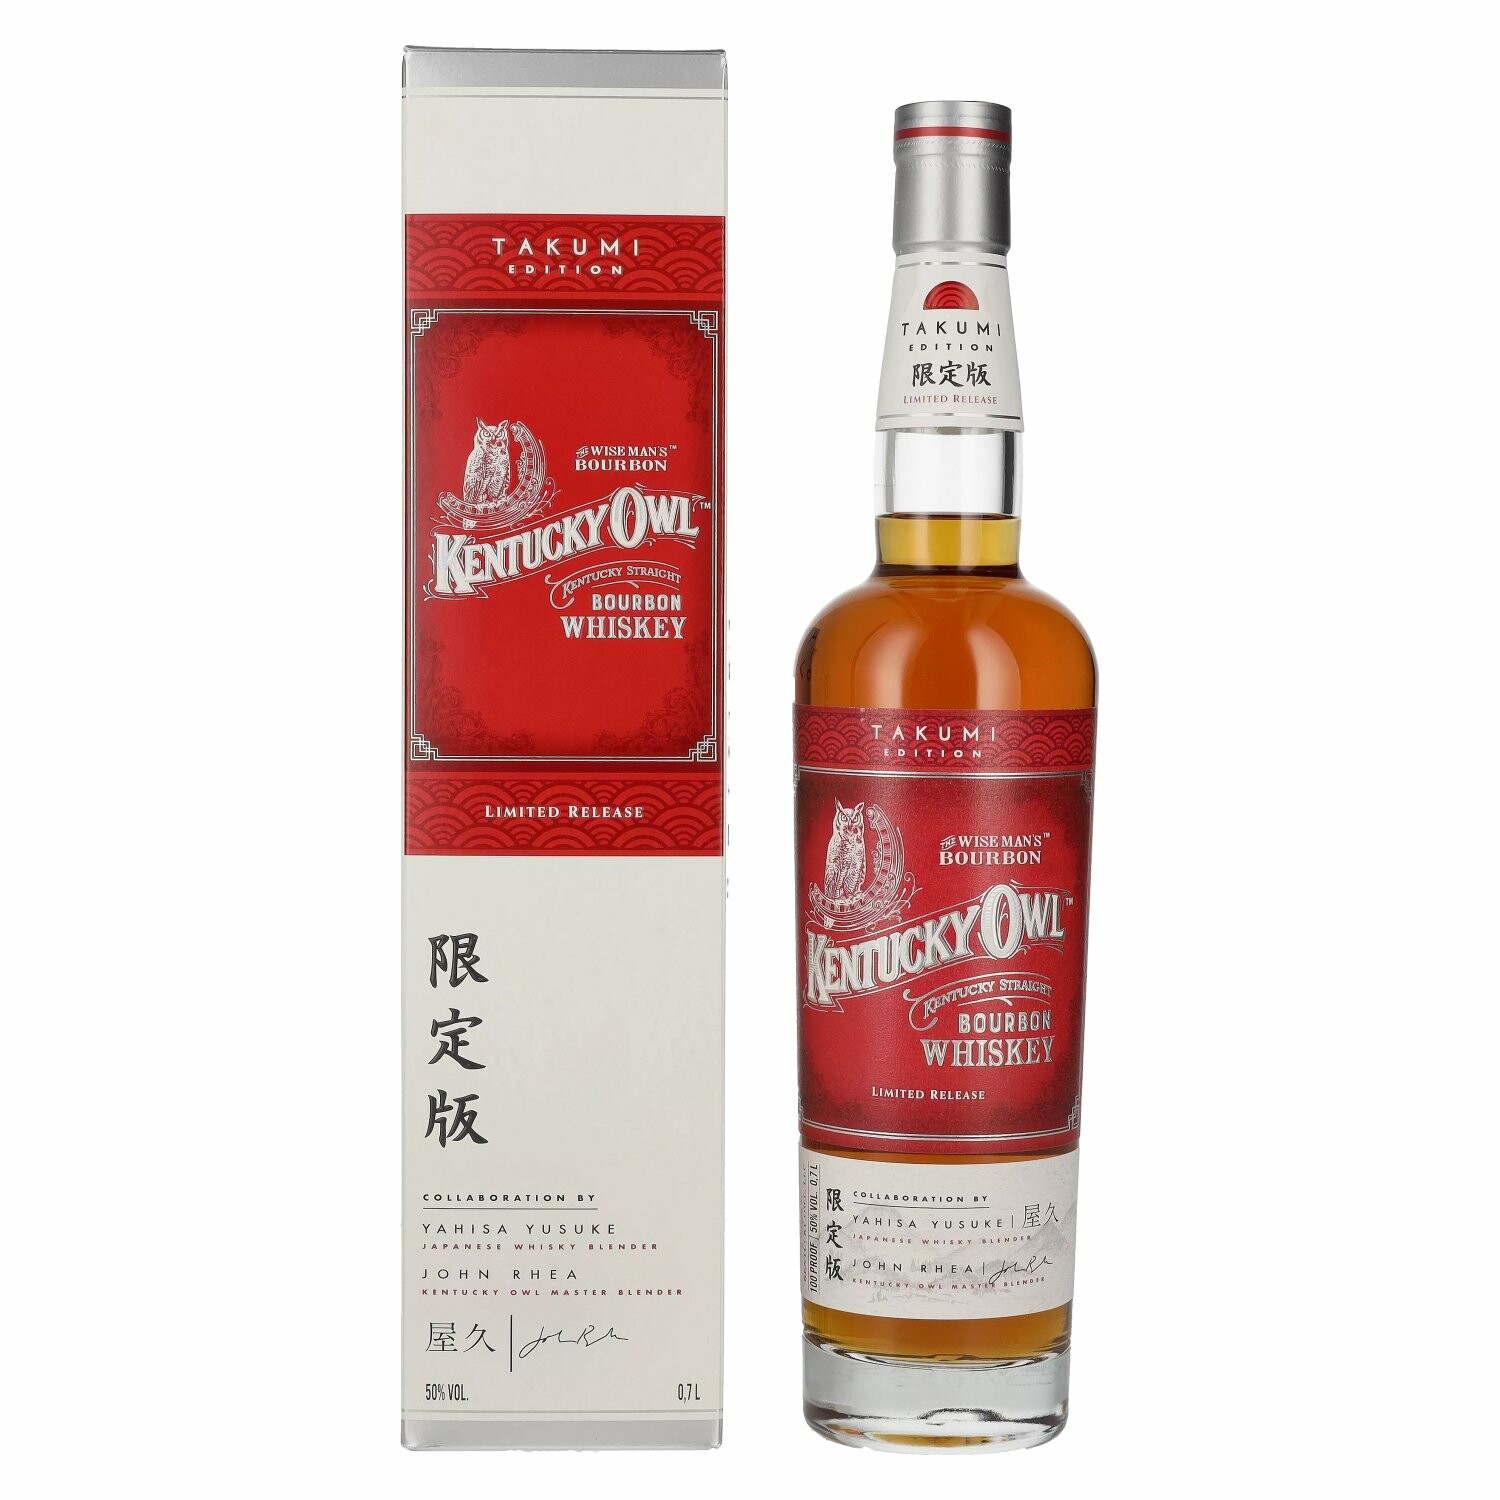 Kentucky Owl Bourbon Whiskey Takumi Limited Release 50% Vol. 0,7l in Giftbox